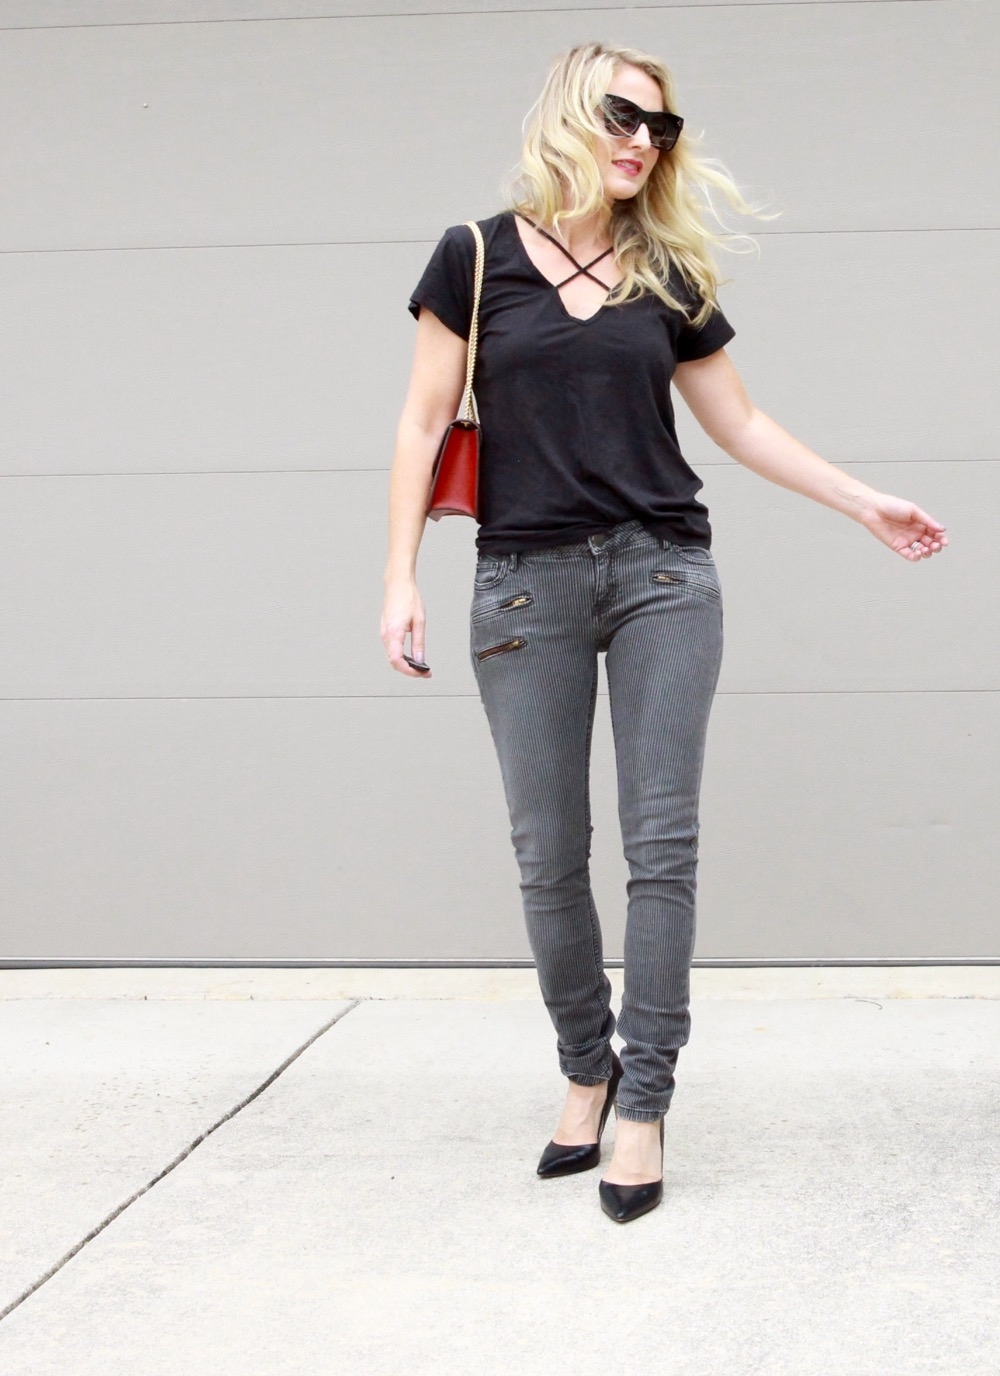 Criss Cross Tee, black tee, great tee, basic tee, wardrobe, styling, shopping, skinny jeans, red bag, jeans, denim, best denim, favorites, fall fashion, outfit ideas